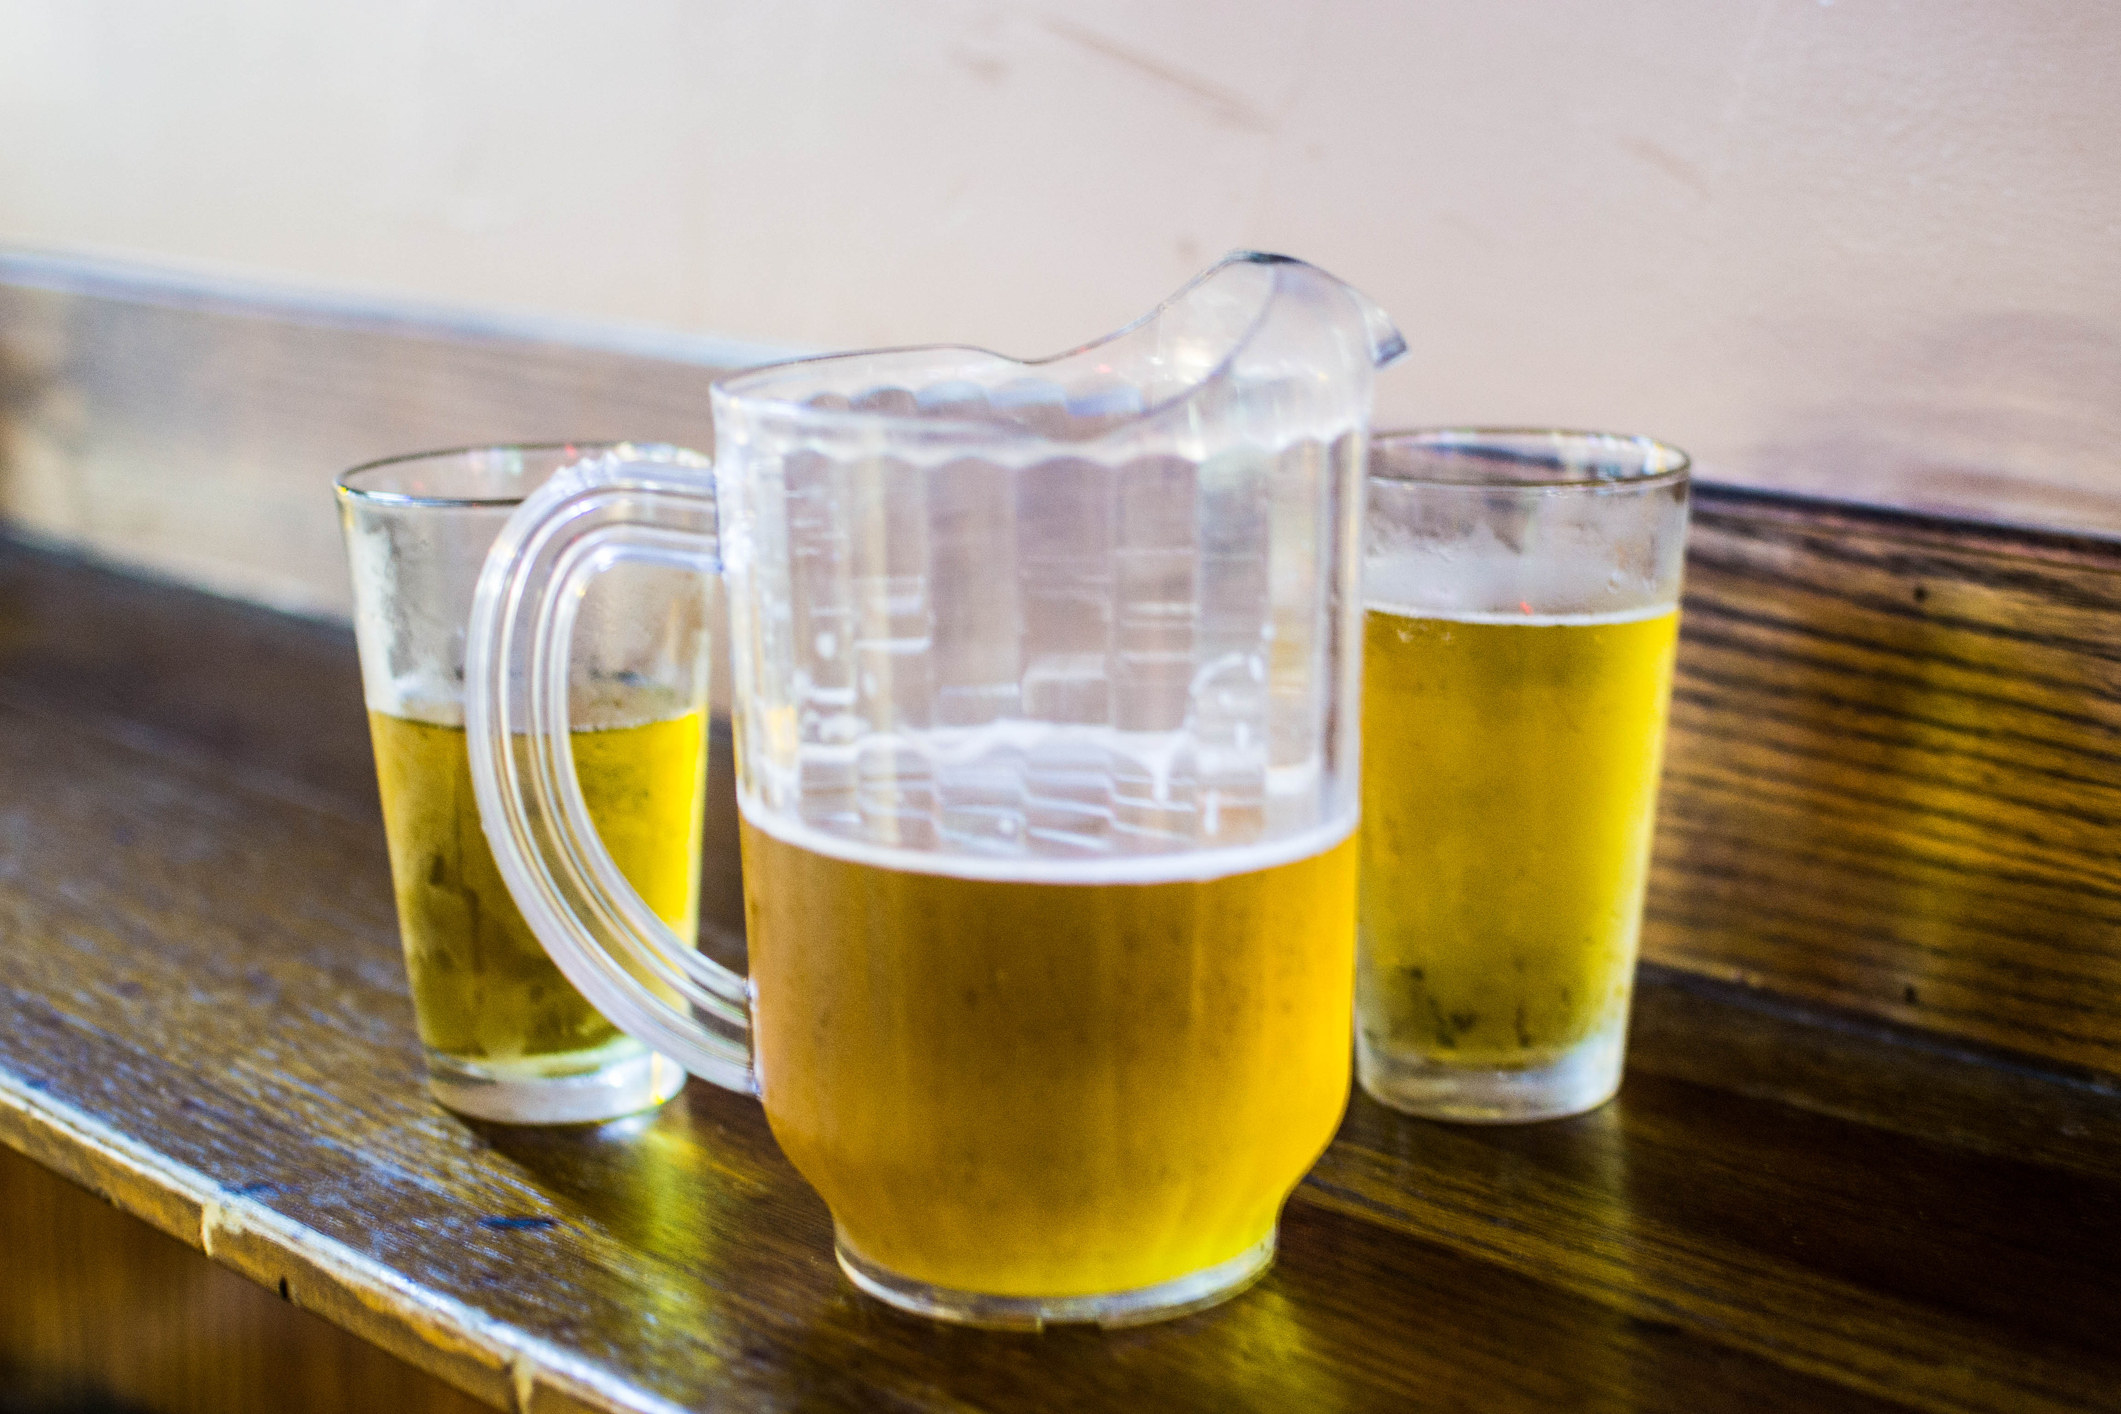 A beer pitcher next to two glasses